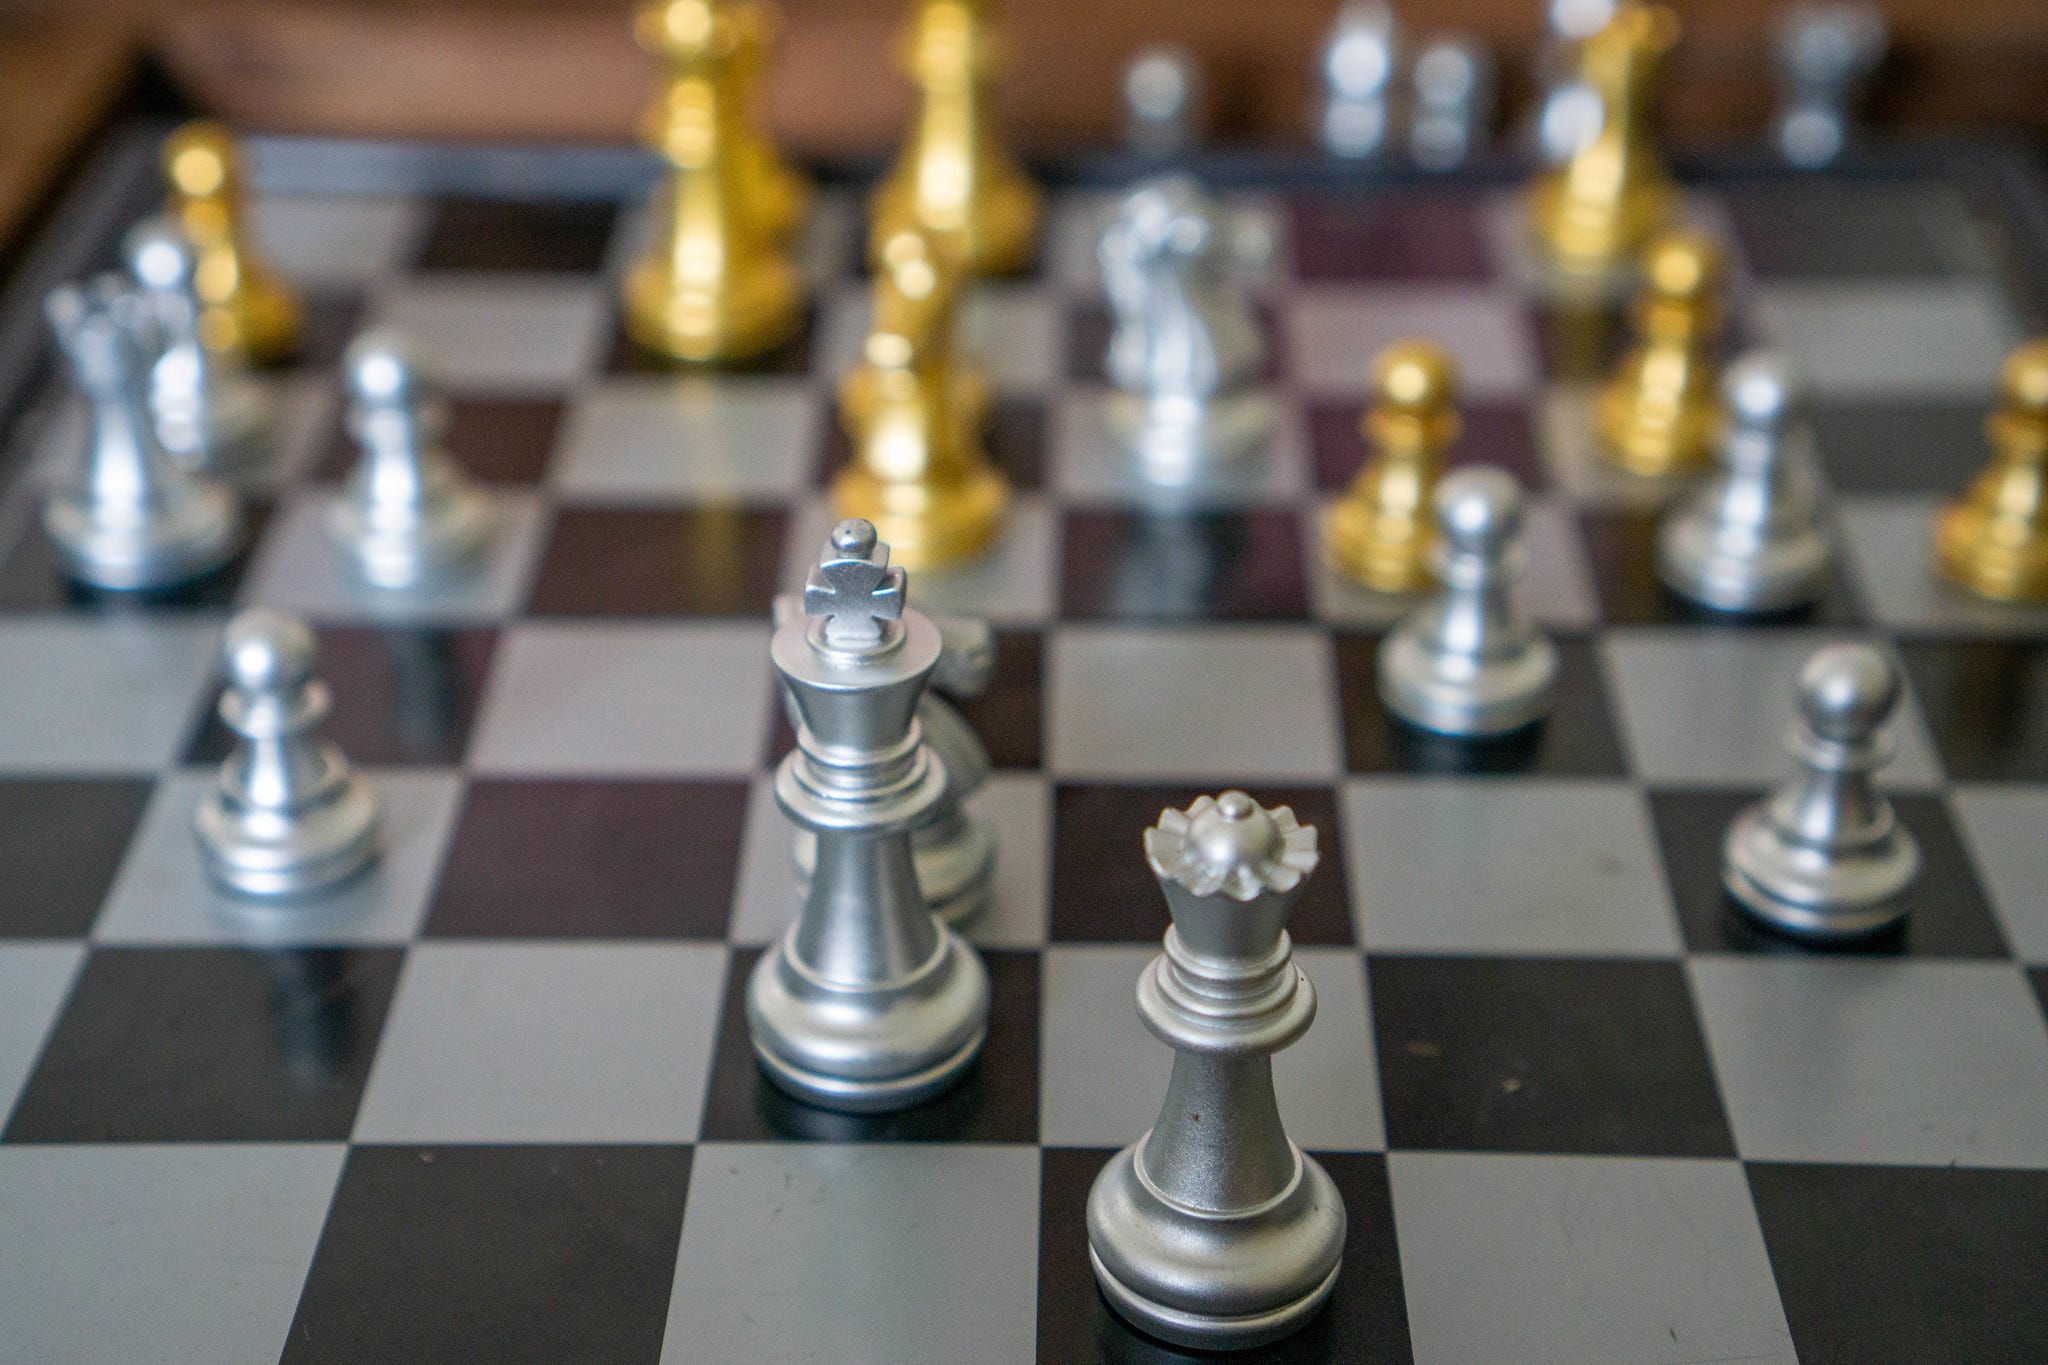 AI unmasks anonymous chess players, posing privacy risks, Science